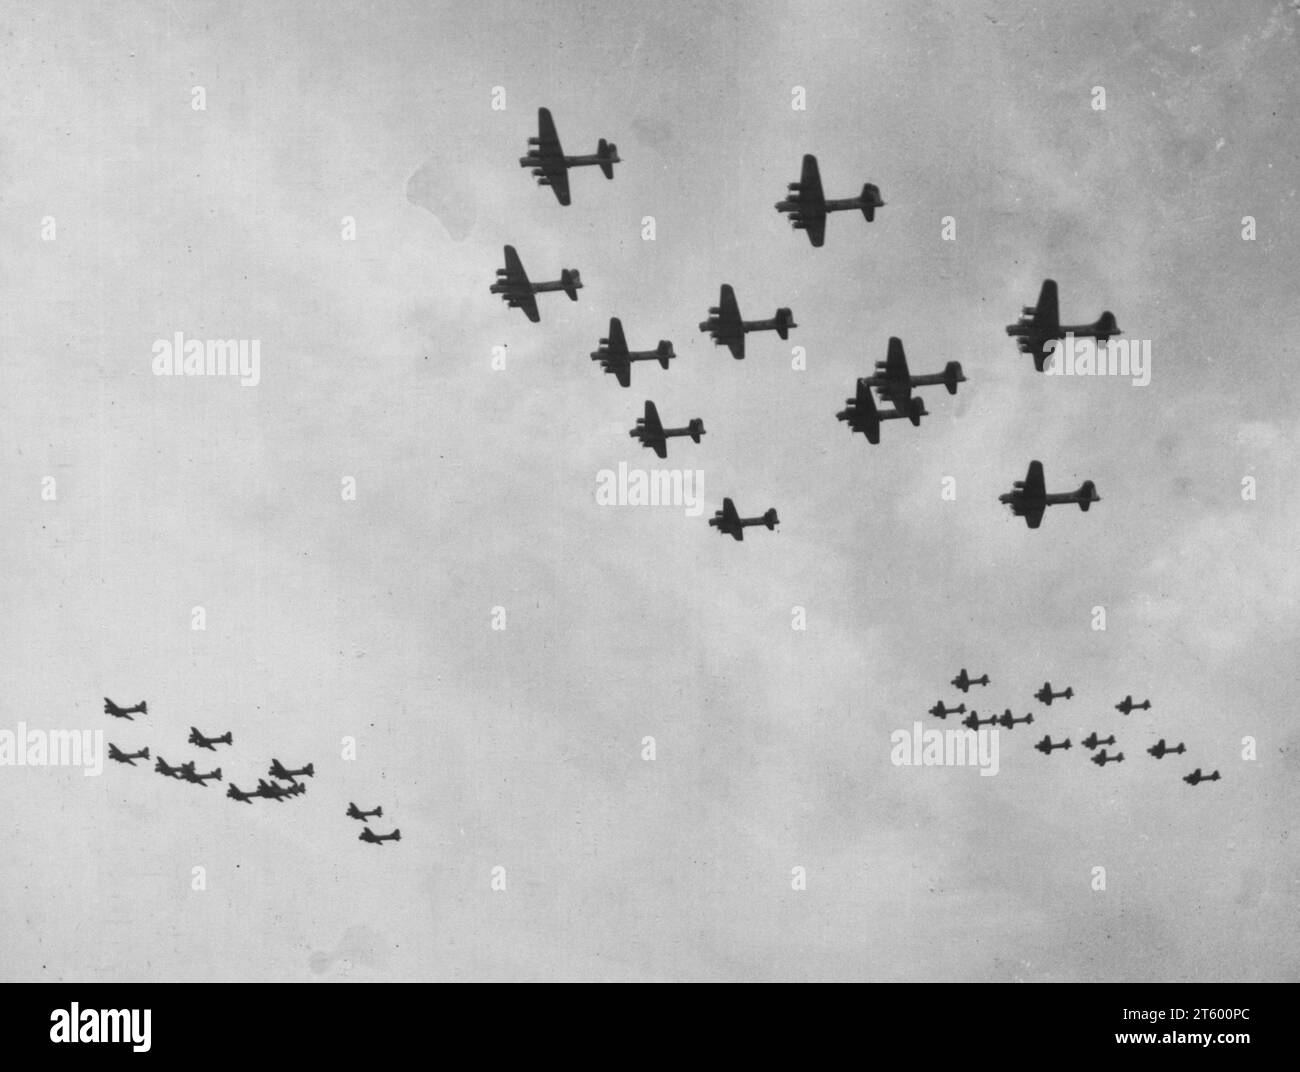 A Large Formation Of 401St Bomb Group Boeing B-17 'Flying Fortresses'Heads For Home Base In England After Bombing Enemy Installations At Dresden, Germany On 23 April 1945 Stock Photo